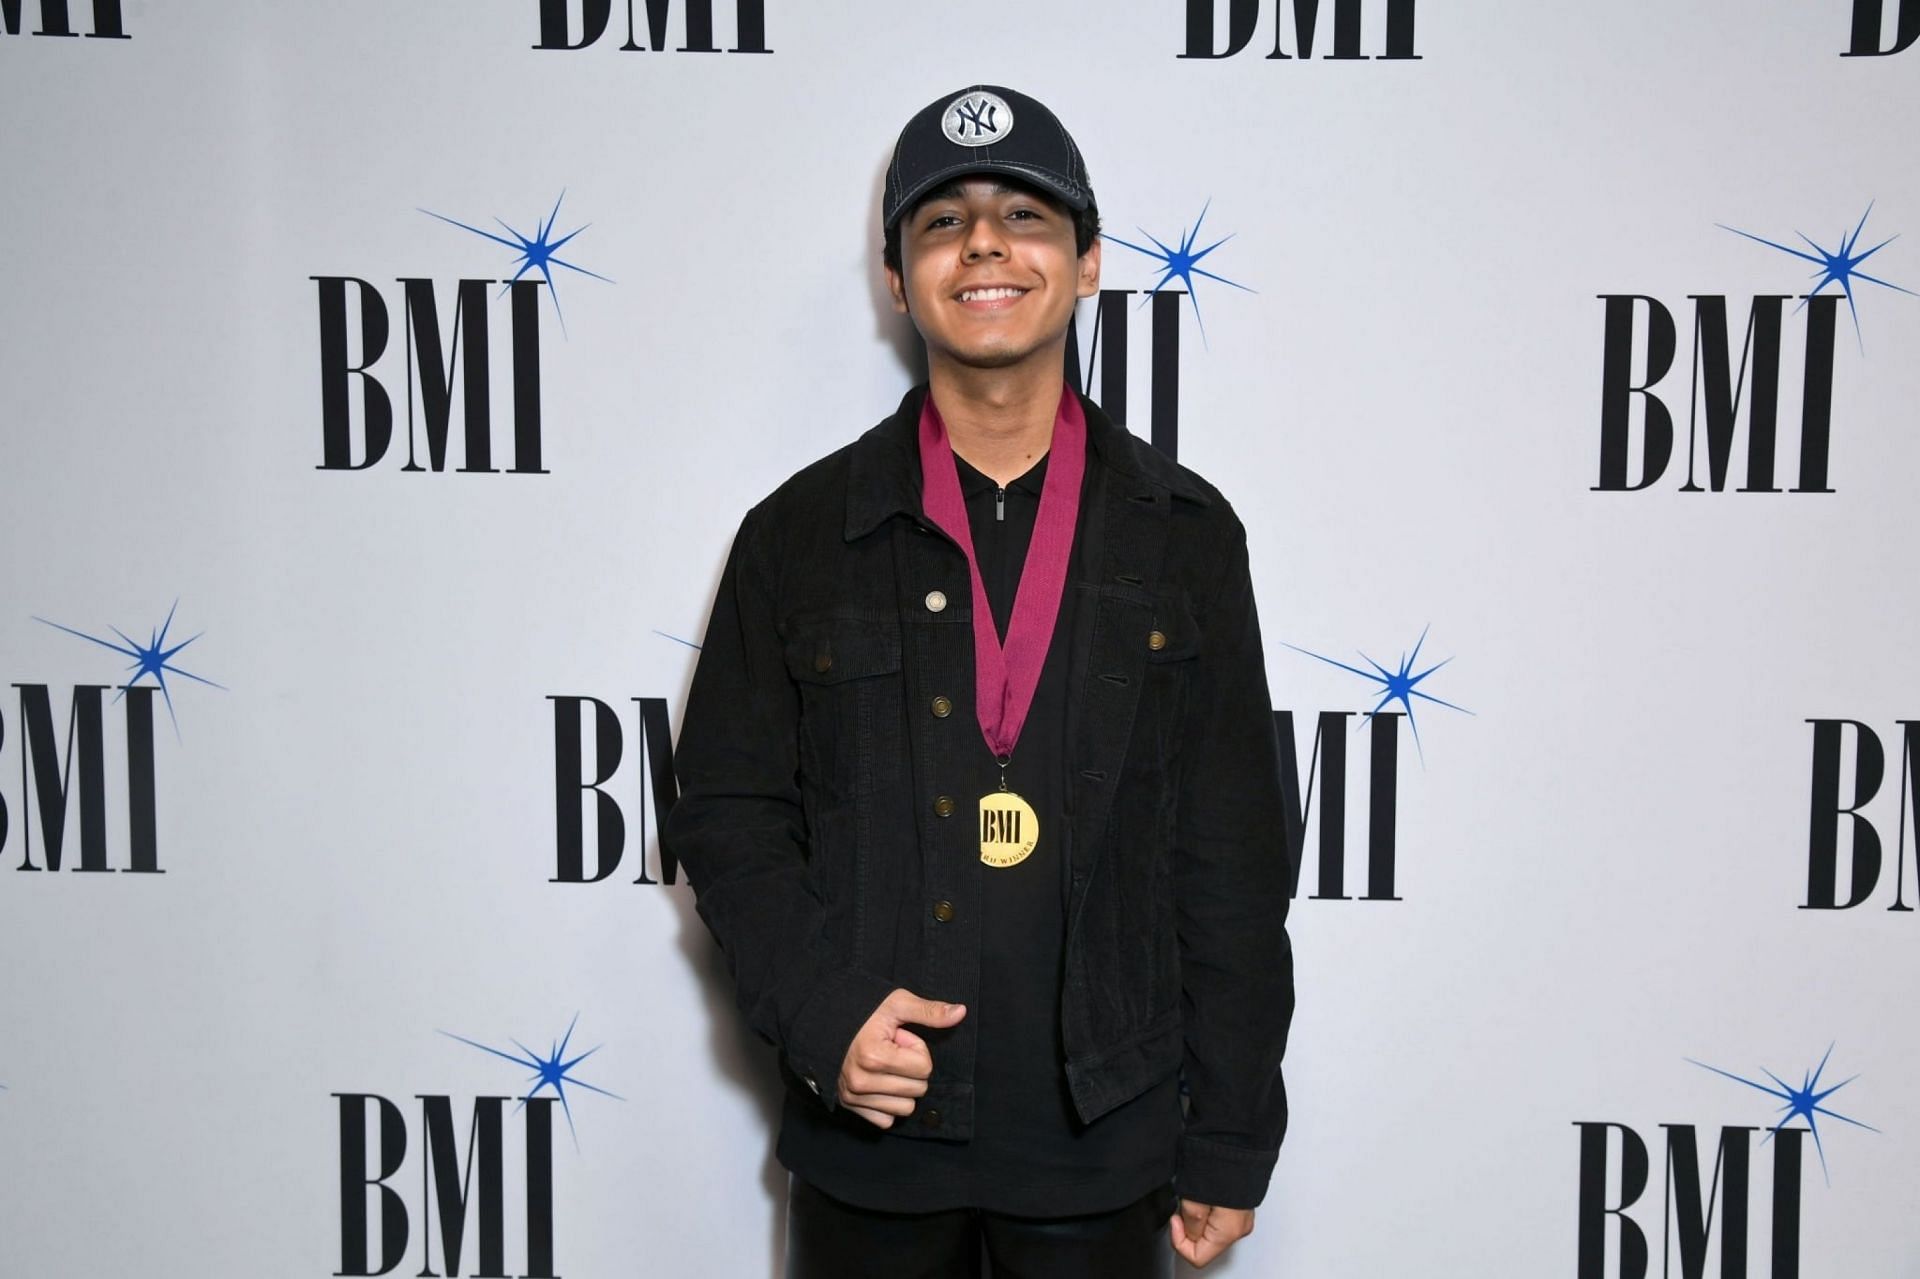  Ivan Cornejo at the 2023 BMI Latin Awards in Beverly Hills, California  on March 21, 2023 (Image via Getty Images)